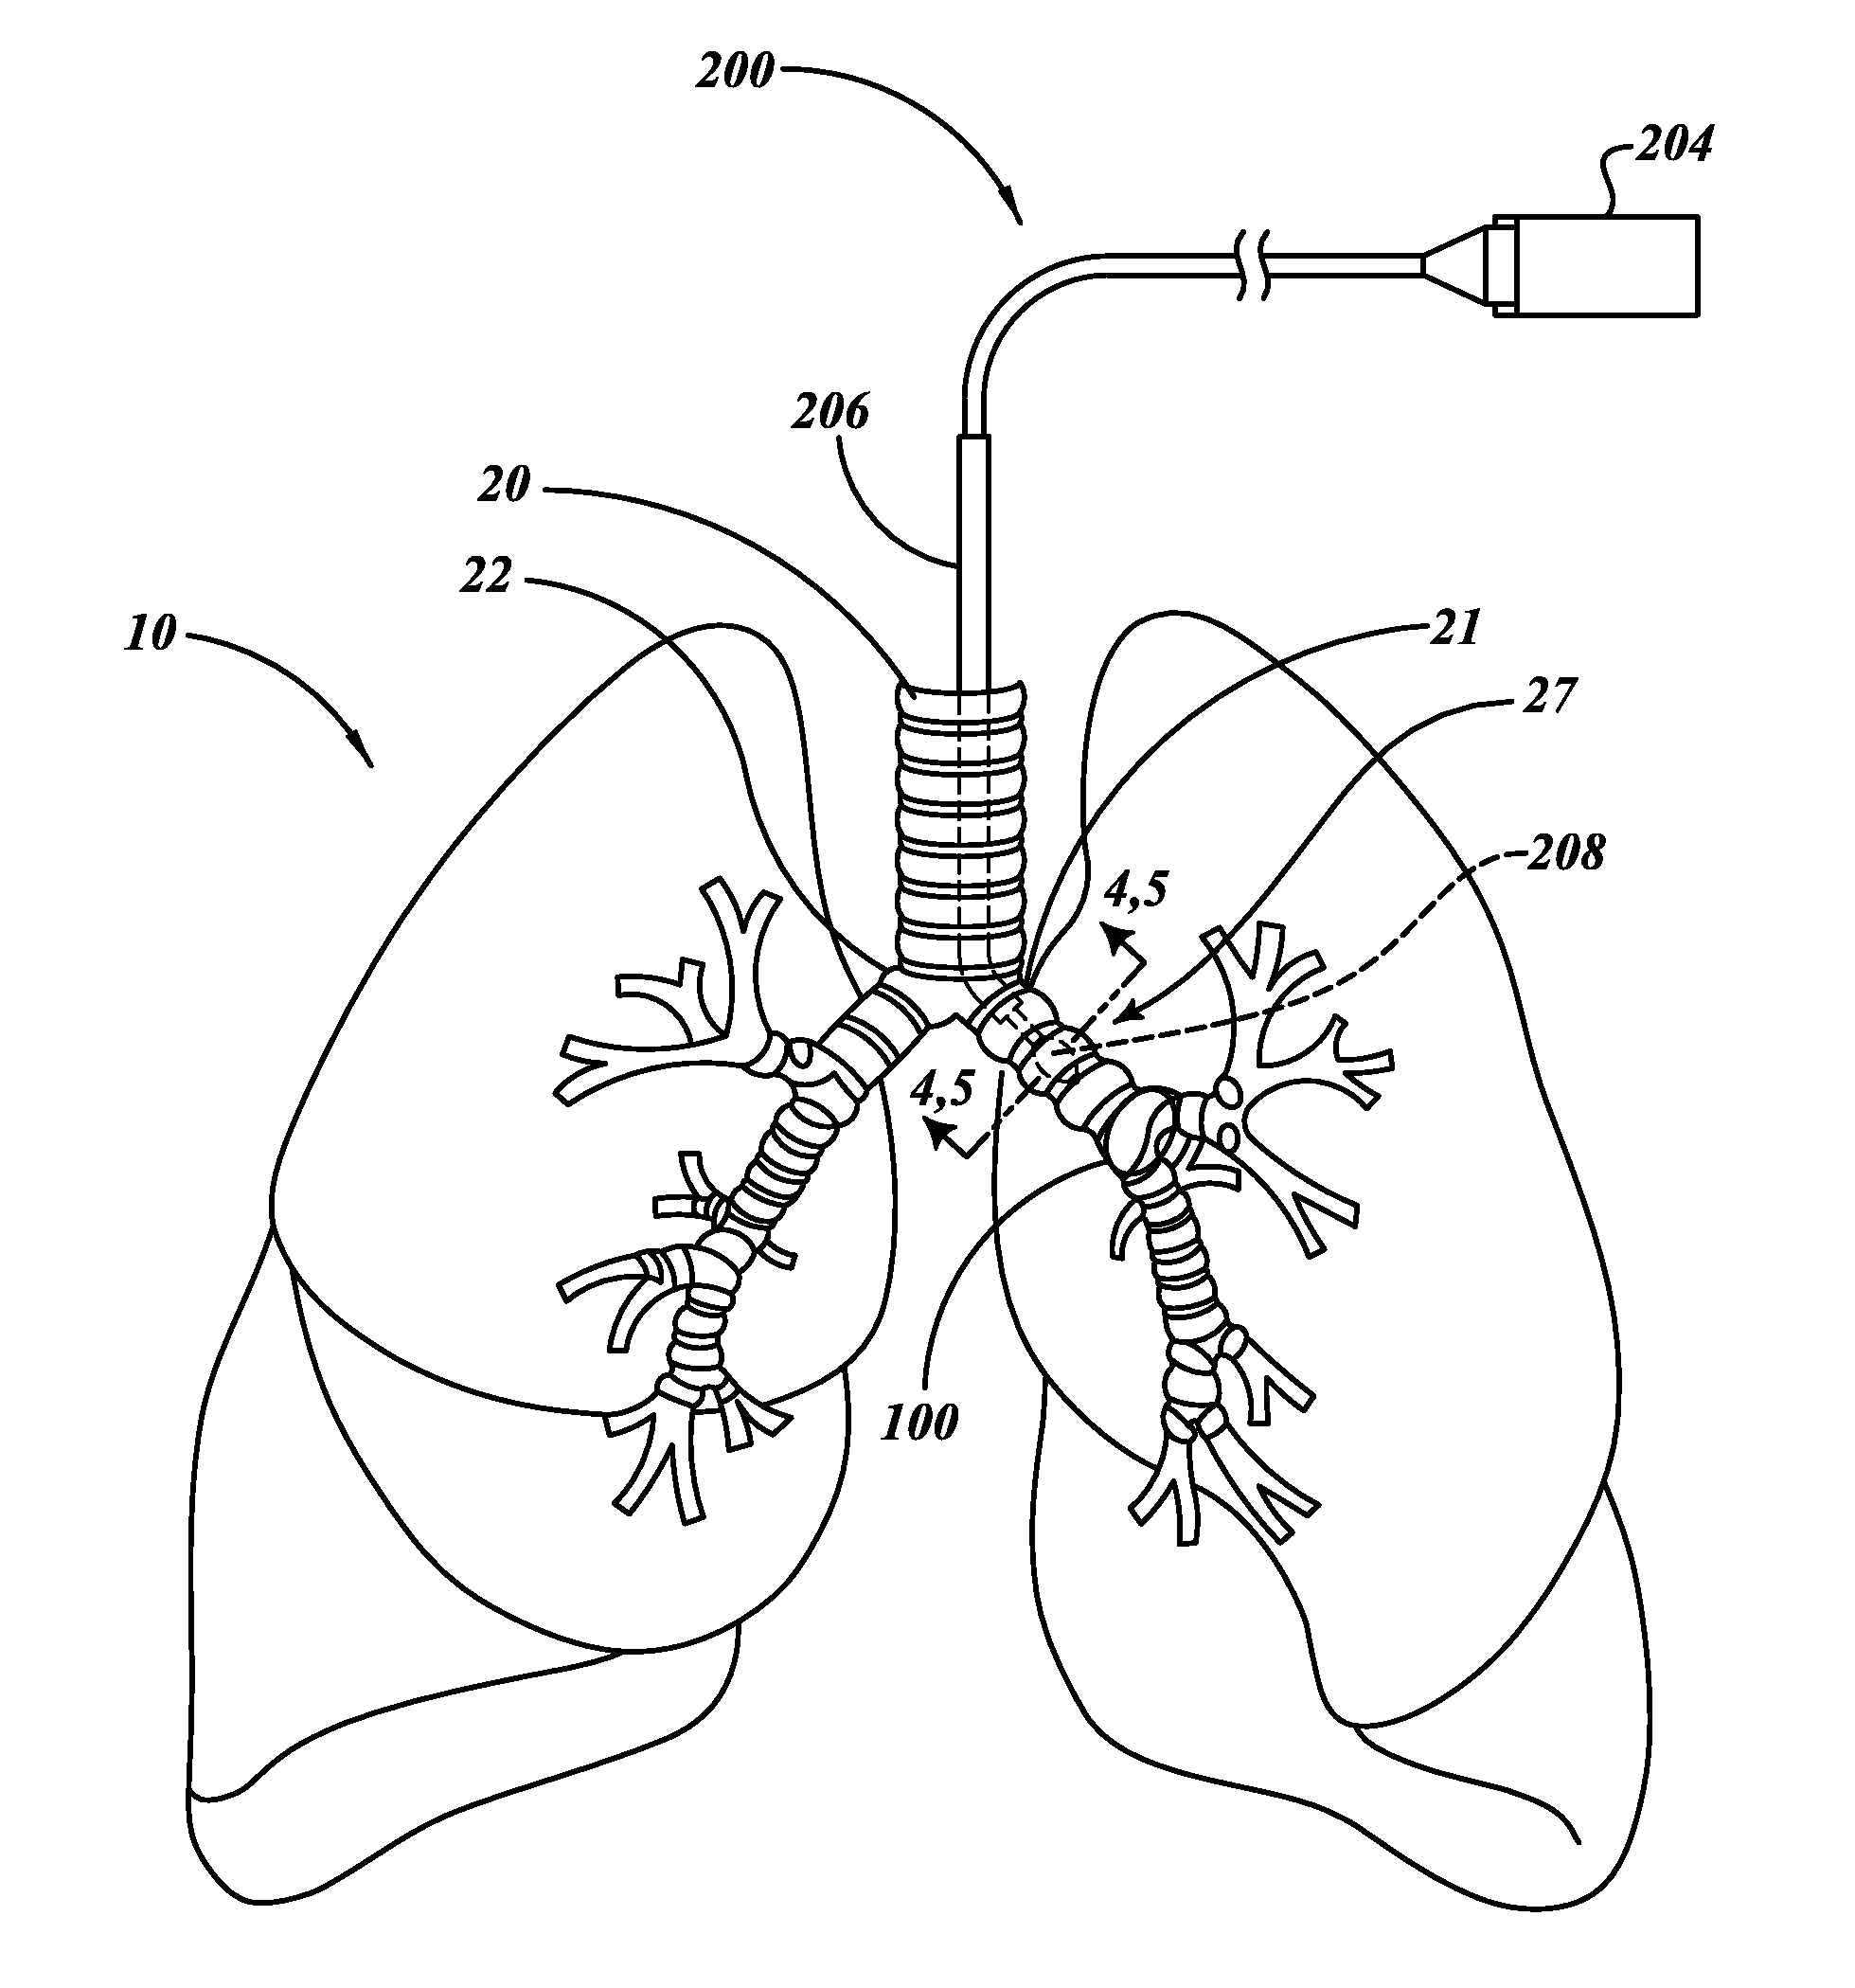 Delivery devices with coolable energy emitting assemblies